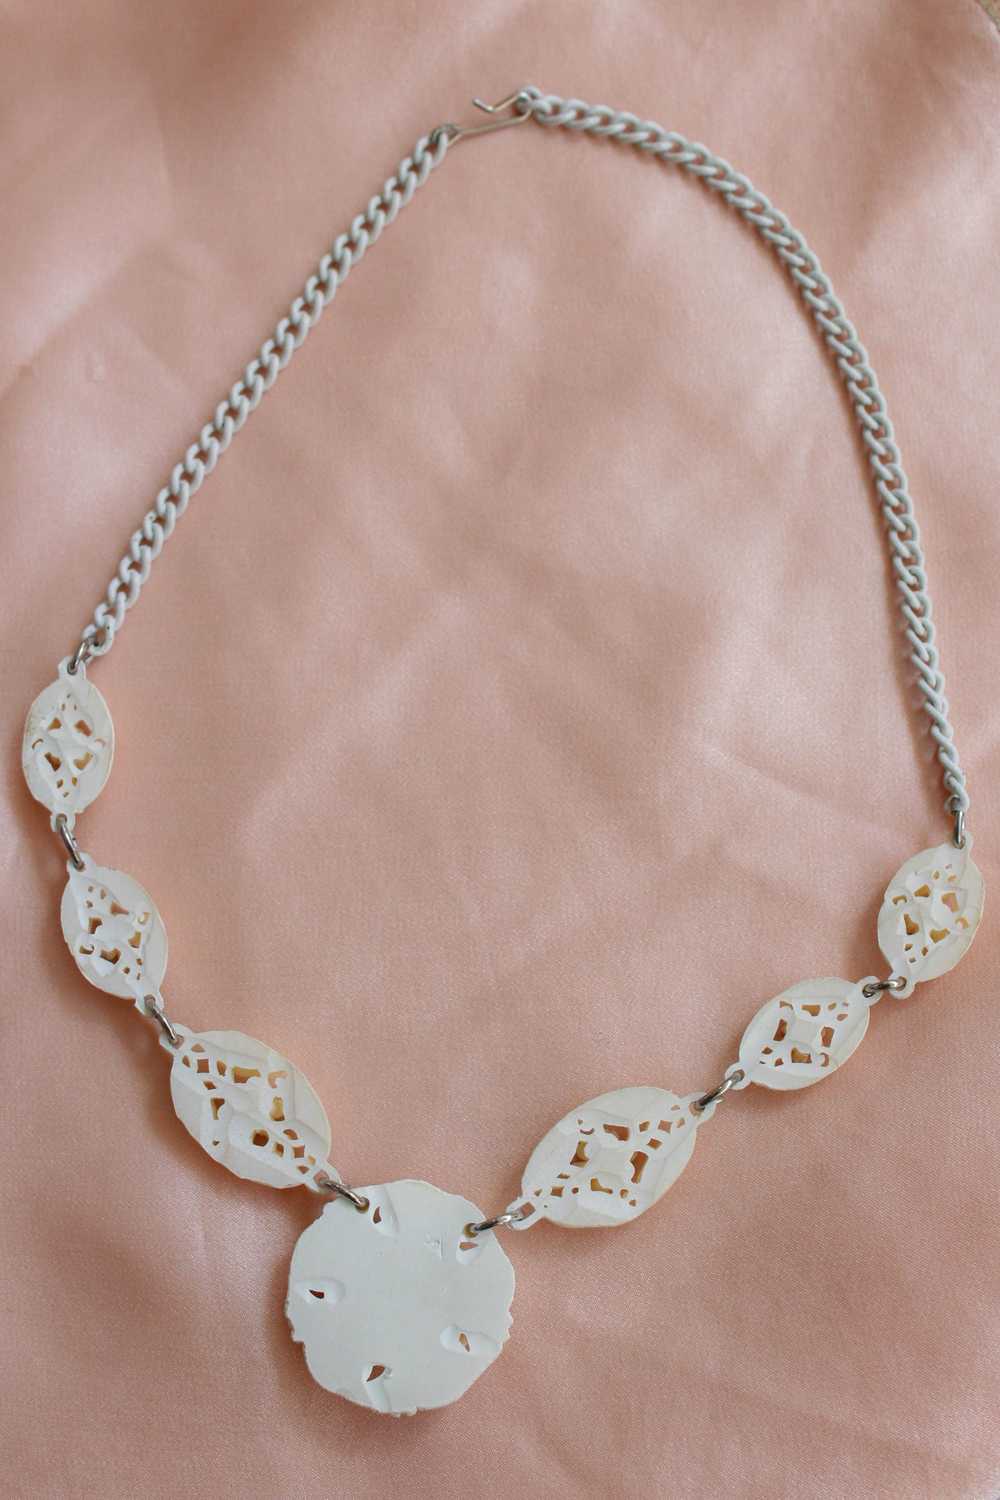 1950s White Carved Celluloid Rhinestone Necklace - image 9